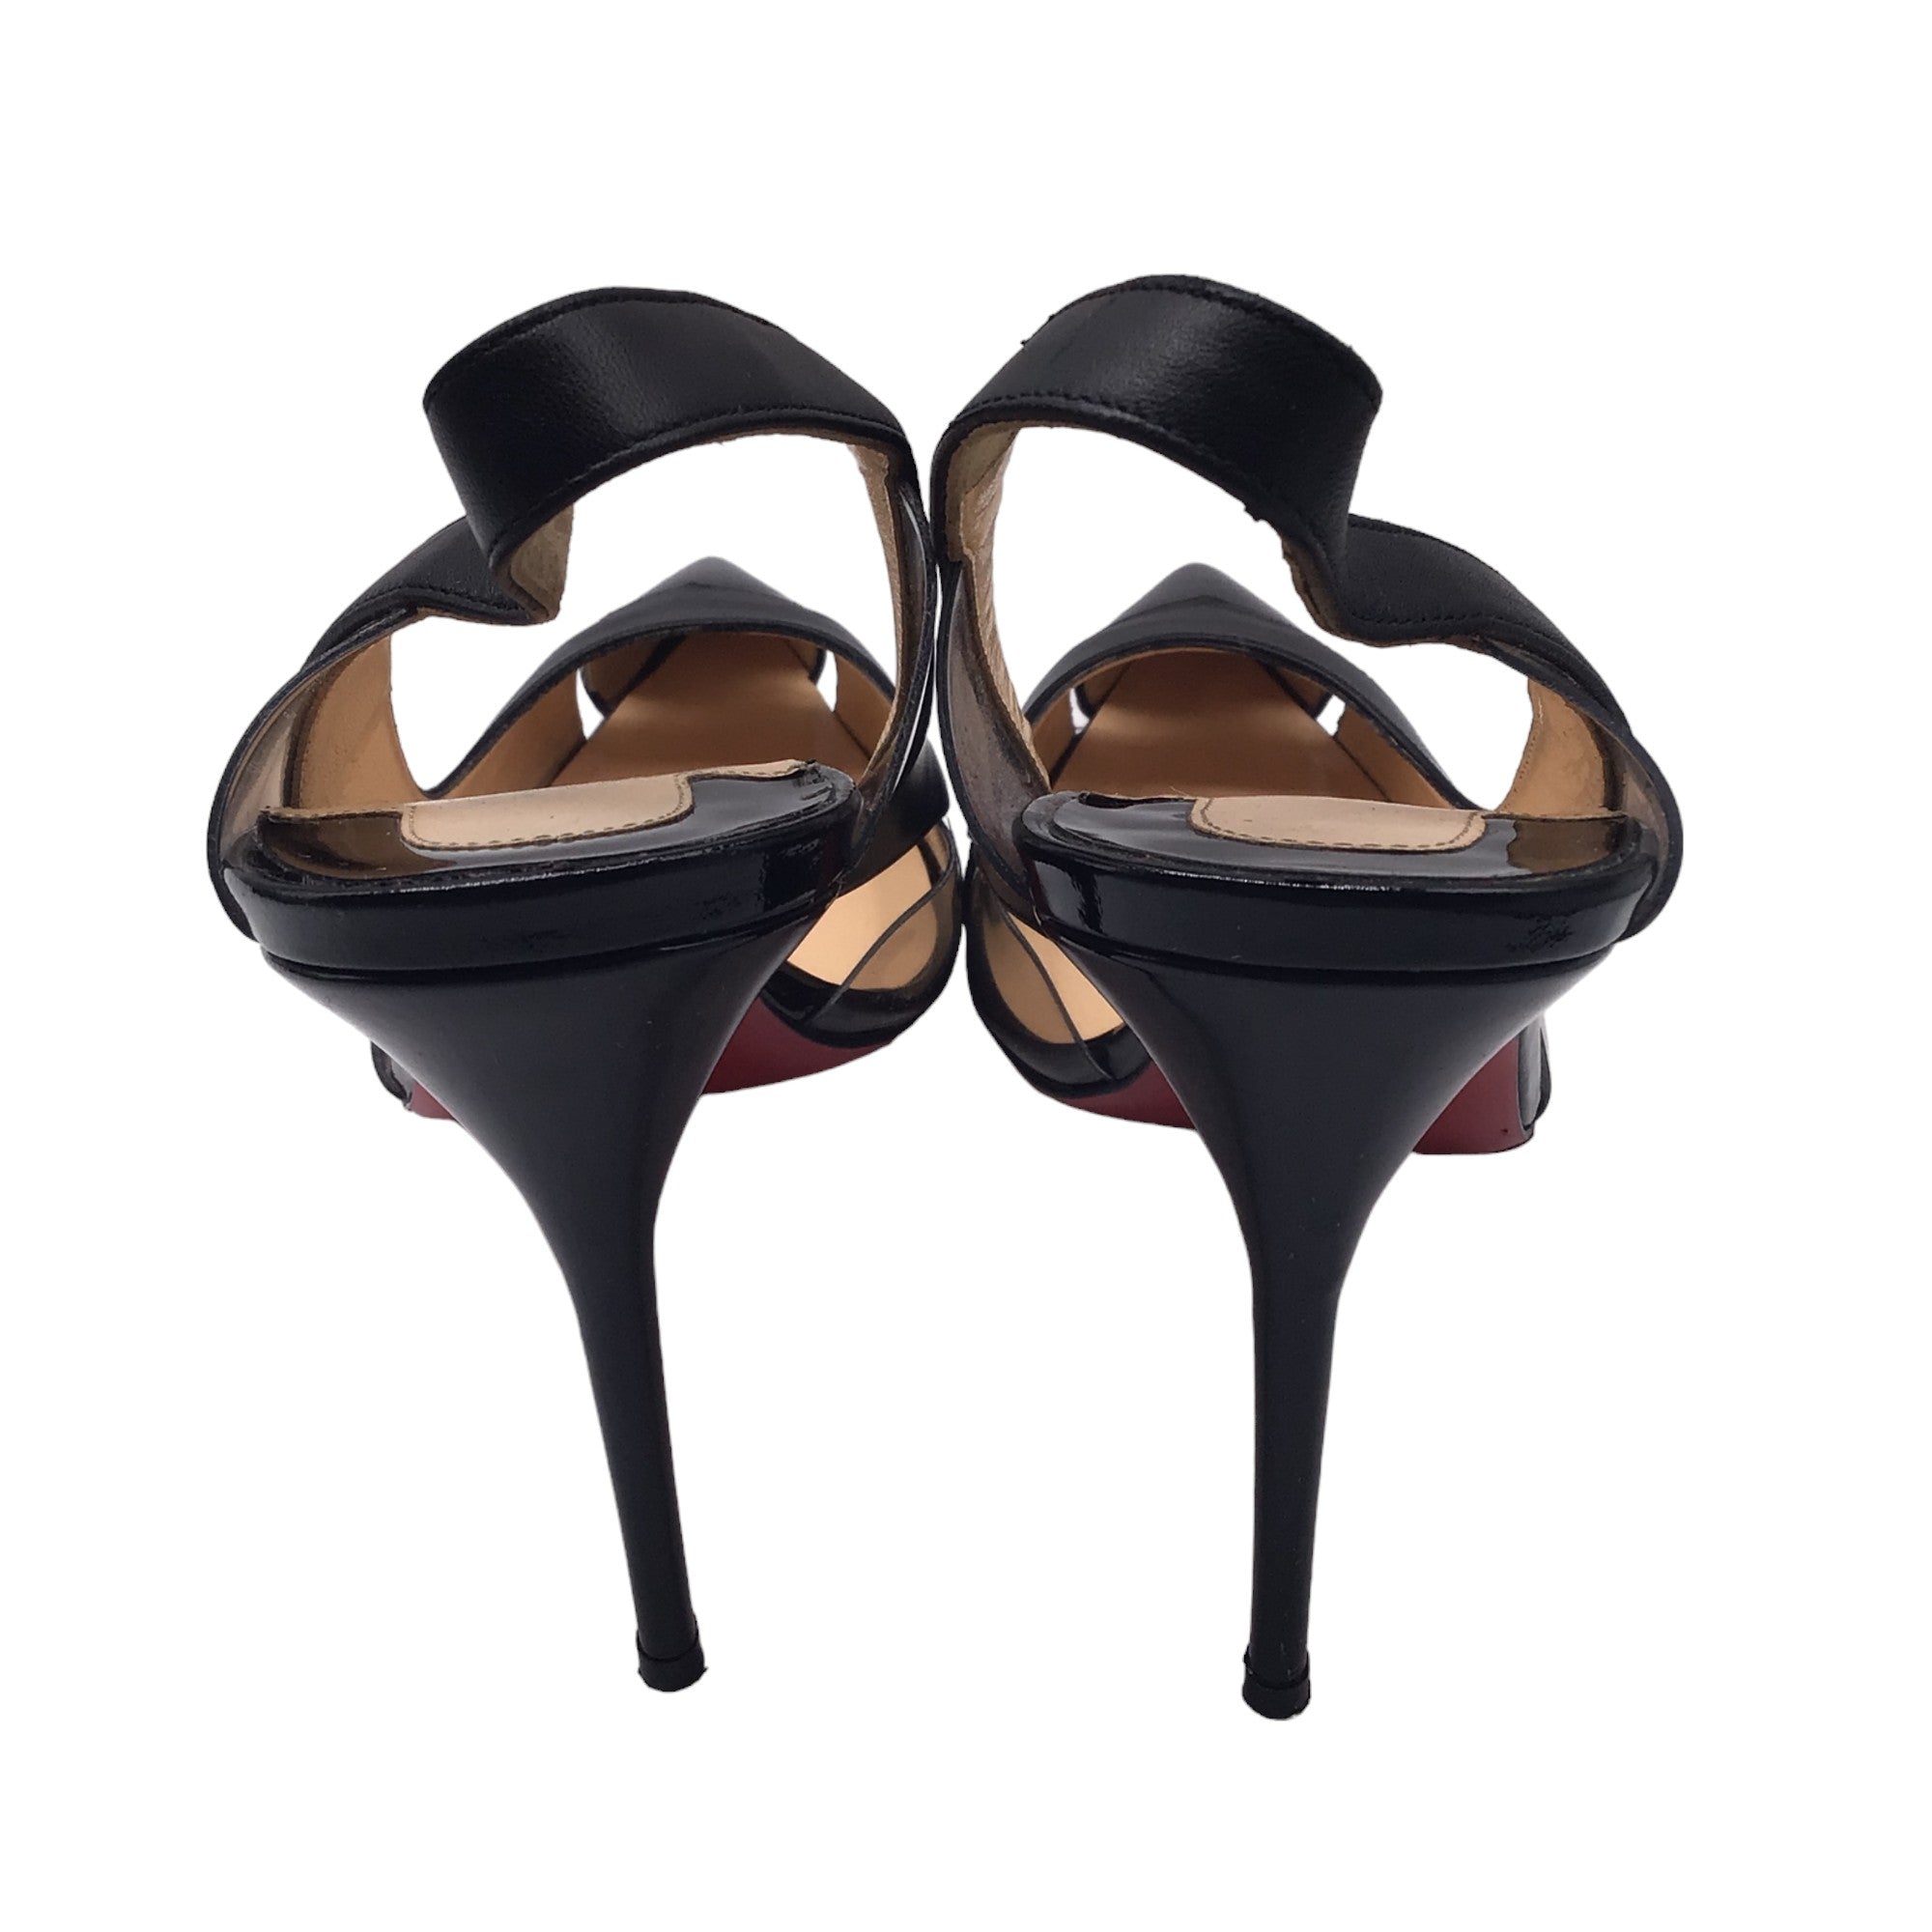 Christian Louboutin Black Leather, Patent Leather, and Lucite Pointed Toe Slingback Pumps